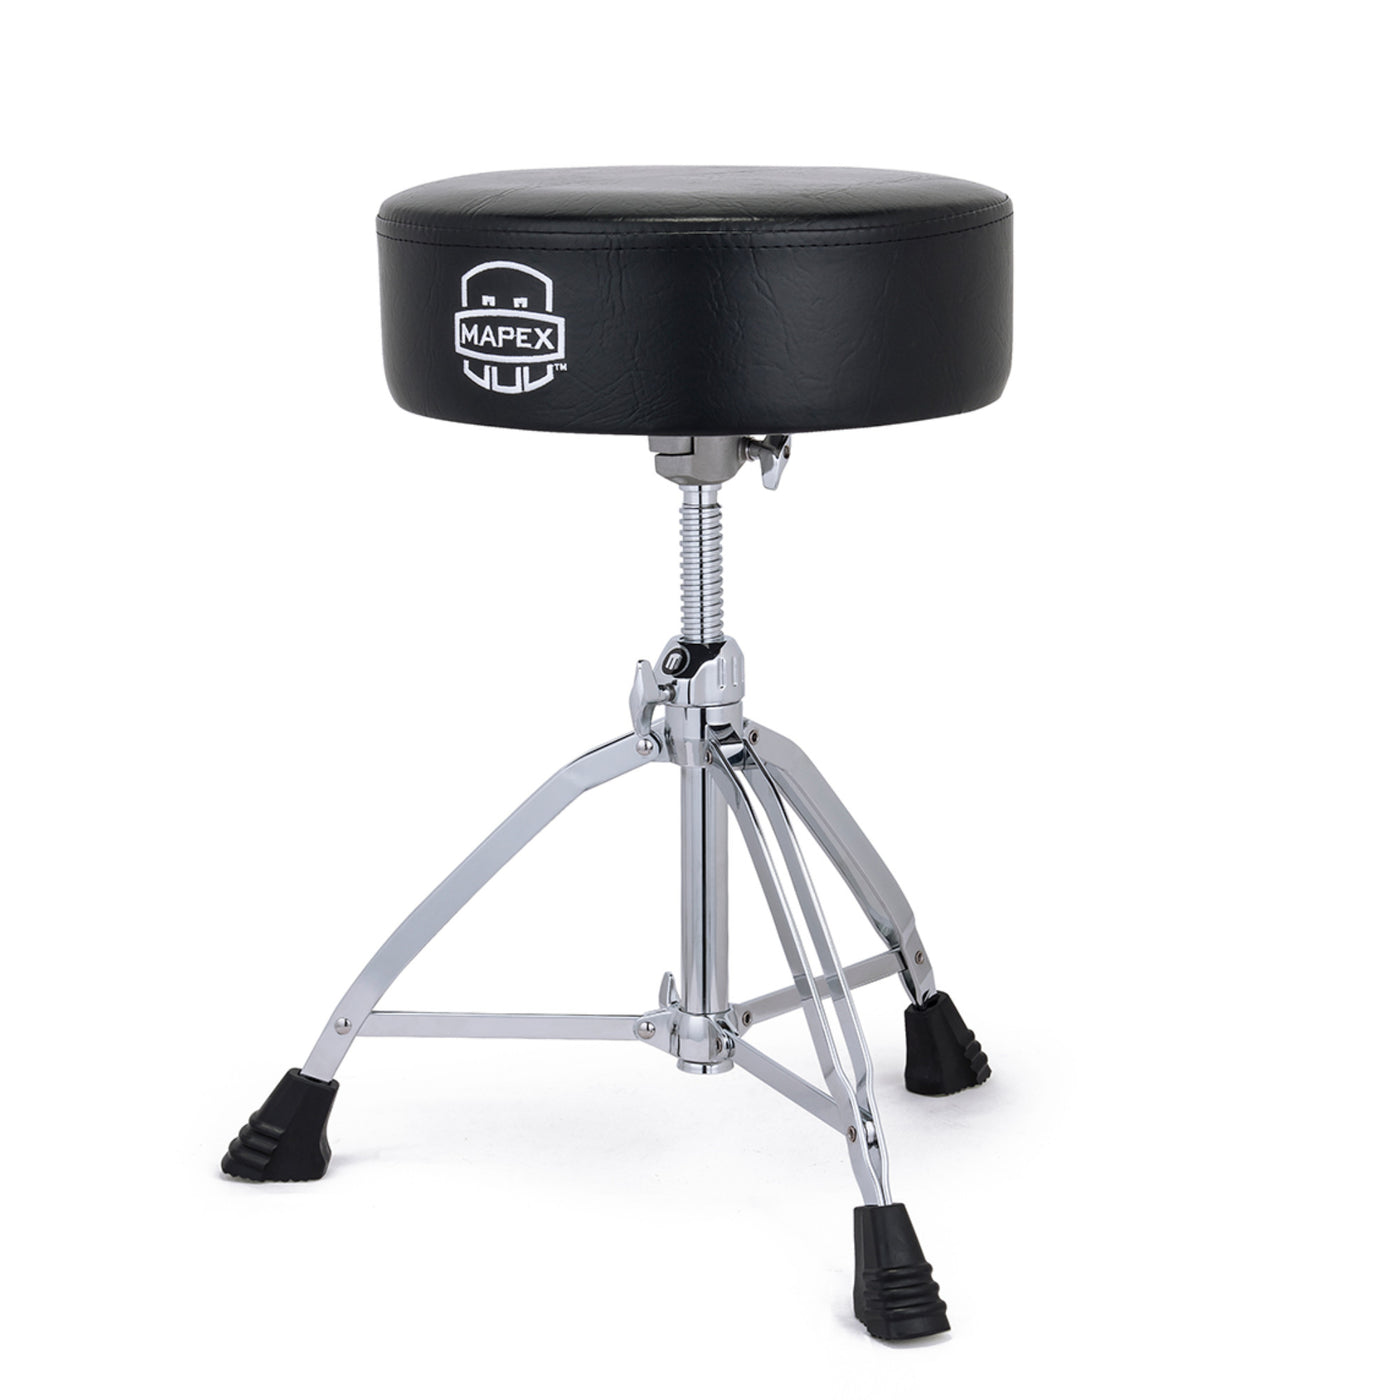 Mapex Round Top Double-Braced Drum Throne With Soft-Vinyl Covering